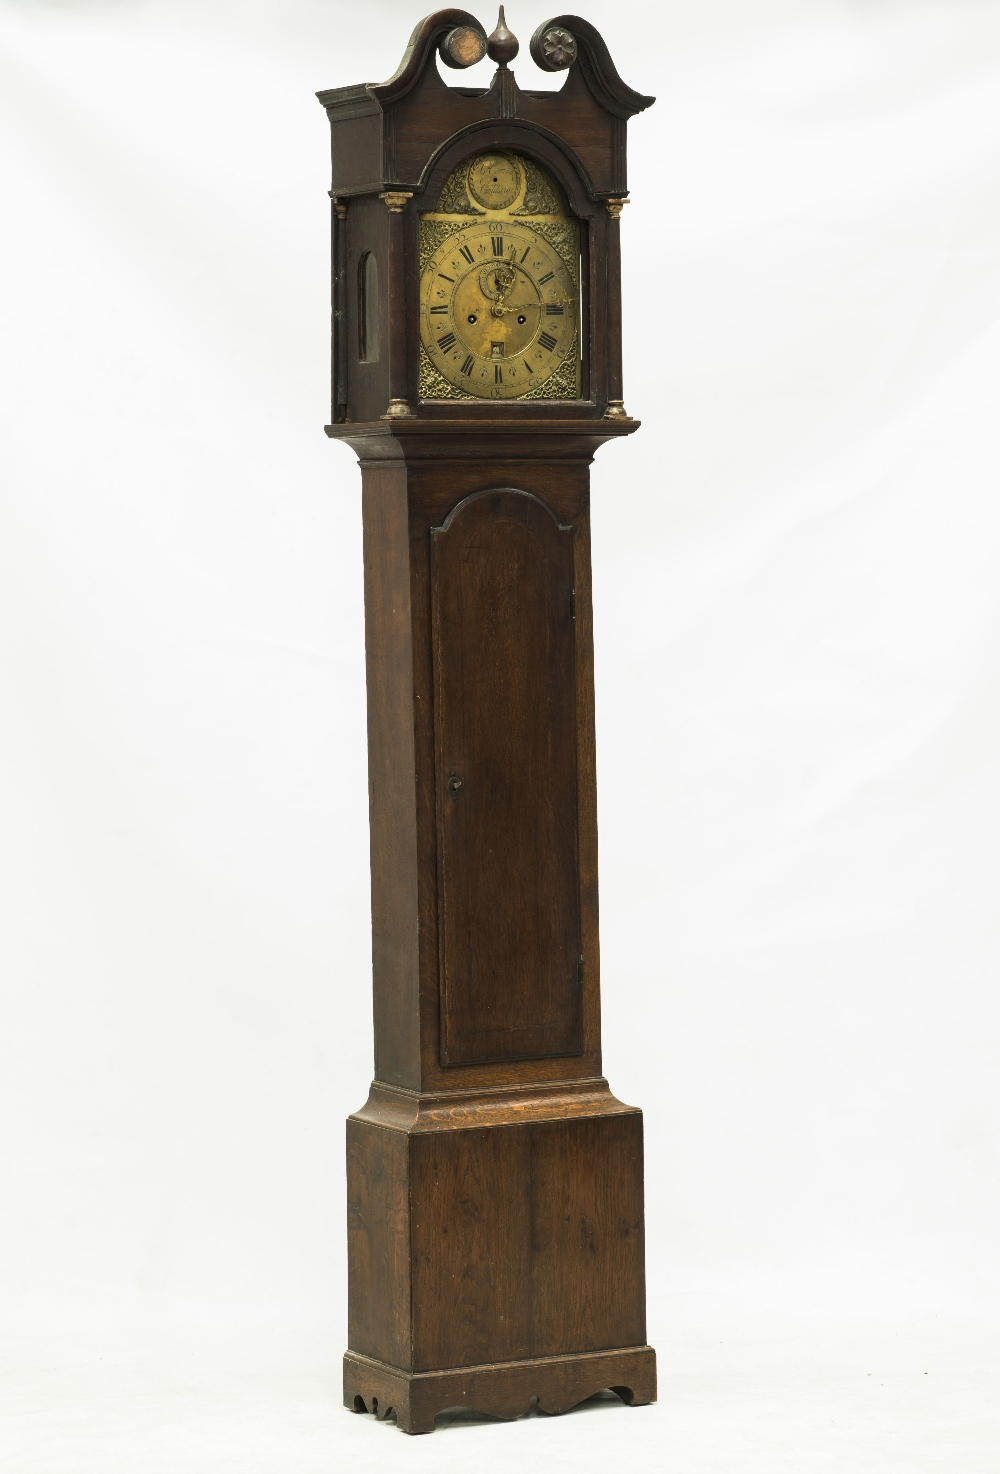 A LATE 18th CENTURY OAK LONGCASE CLOCK, the 11" brass dial signed in the arch James Common,